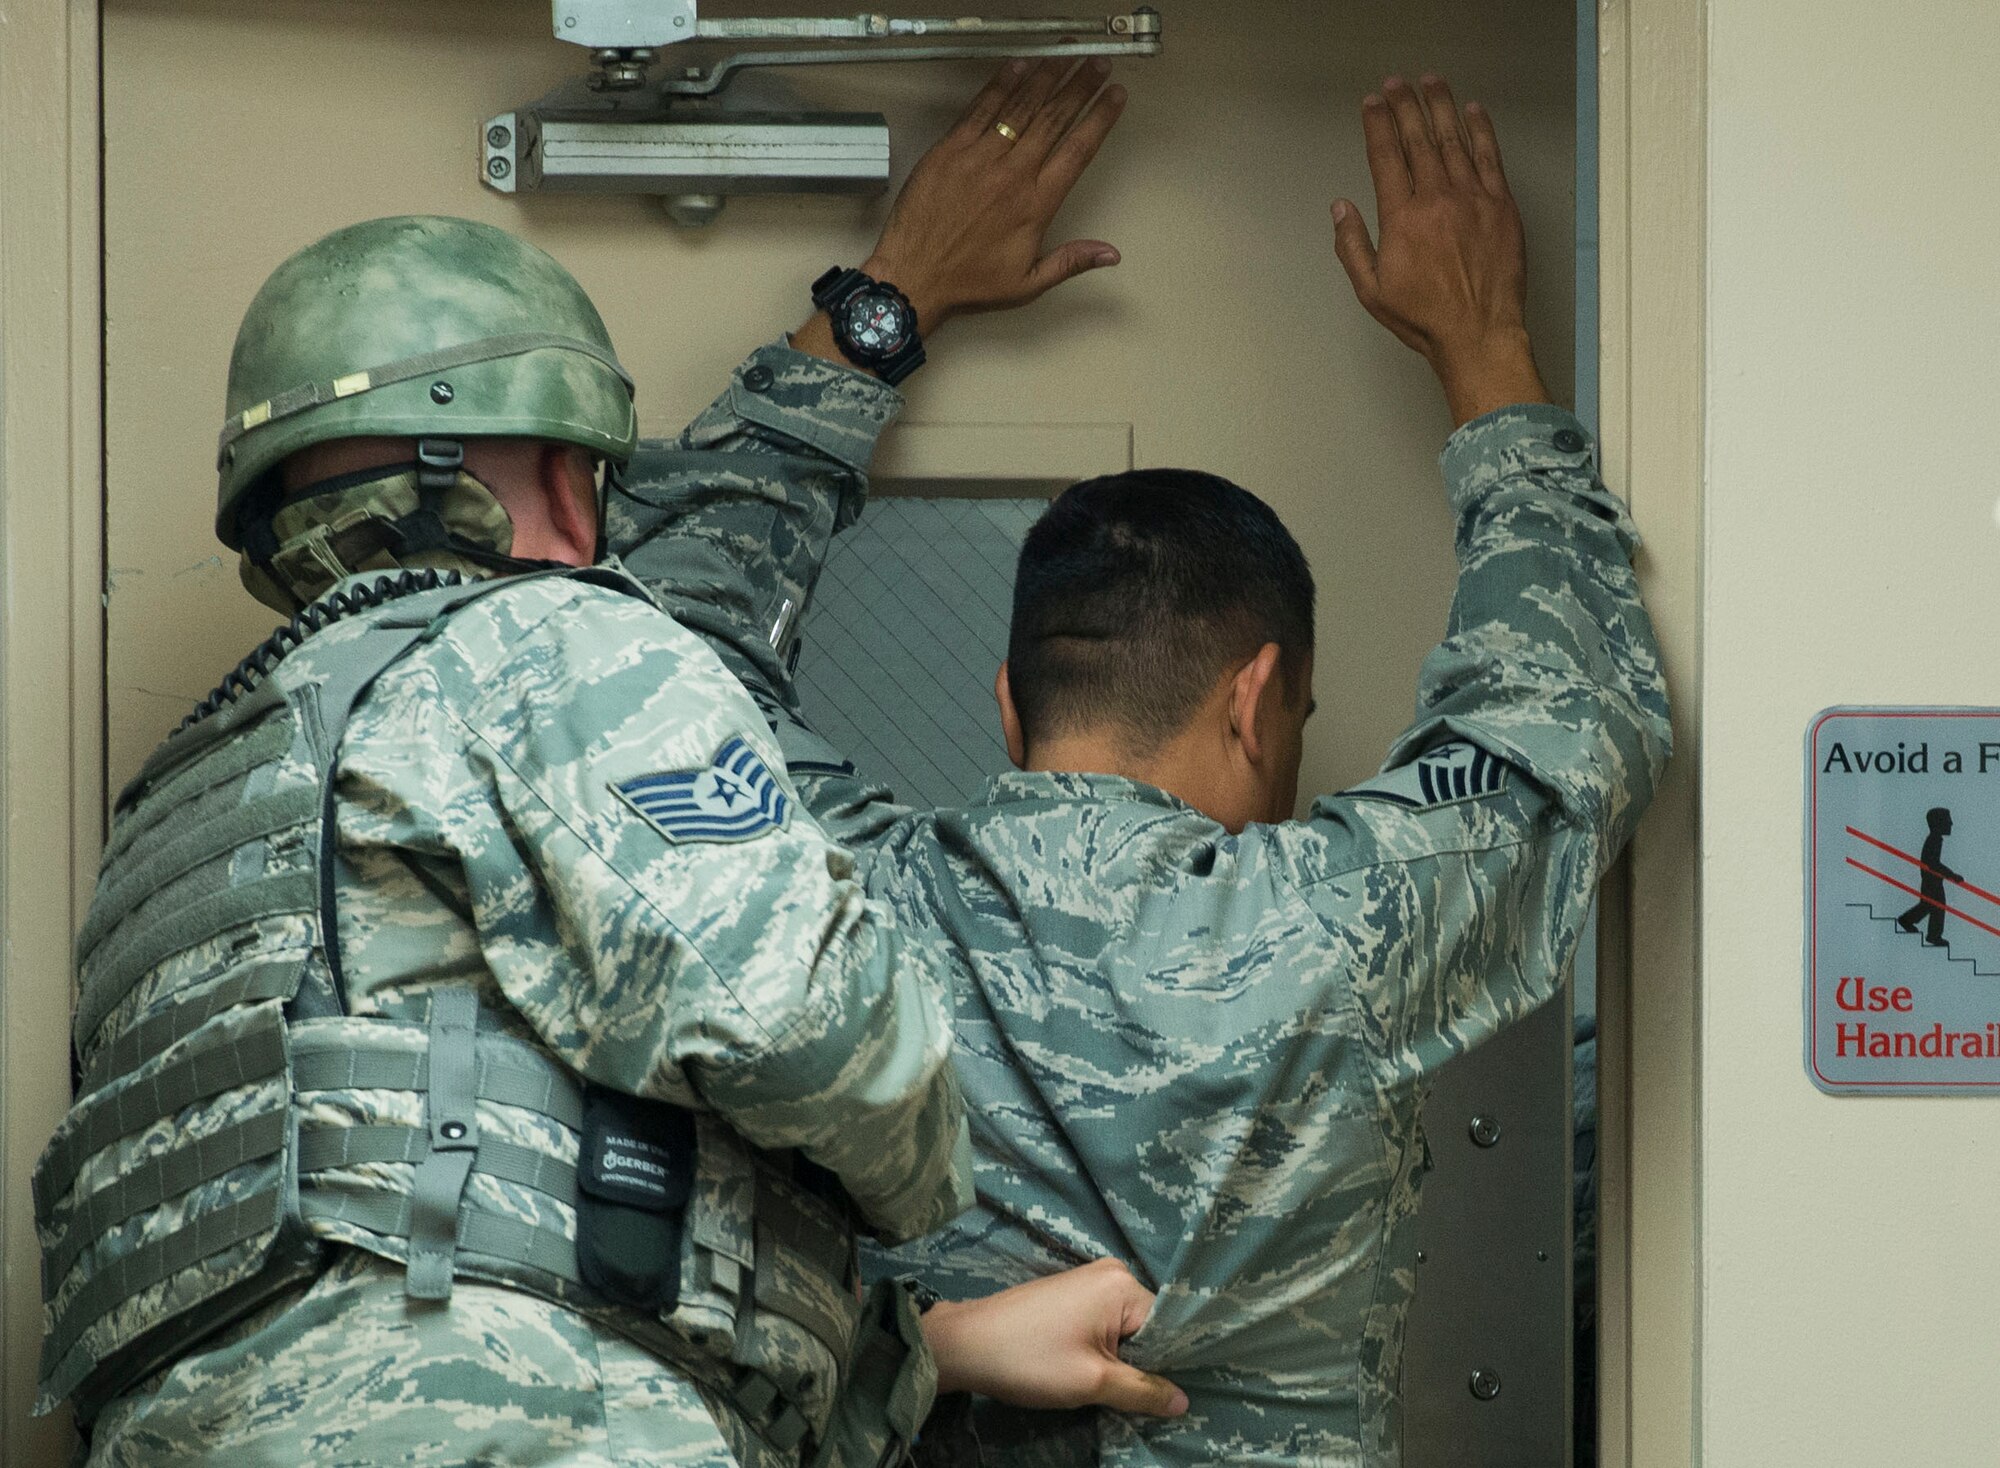 Tech. Sgt. Bryan Dell, 375th Security Forces Squadron, uses a bystander to open the door during an active shooter exercise, Scott Air Force Base, Ill., Sept. 9, 2016.  With an increase of mass shootings, the Department of Defense has trained personnel and first responders on how to respond in an active shooter situation.